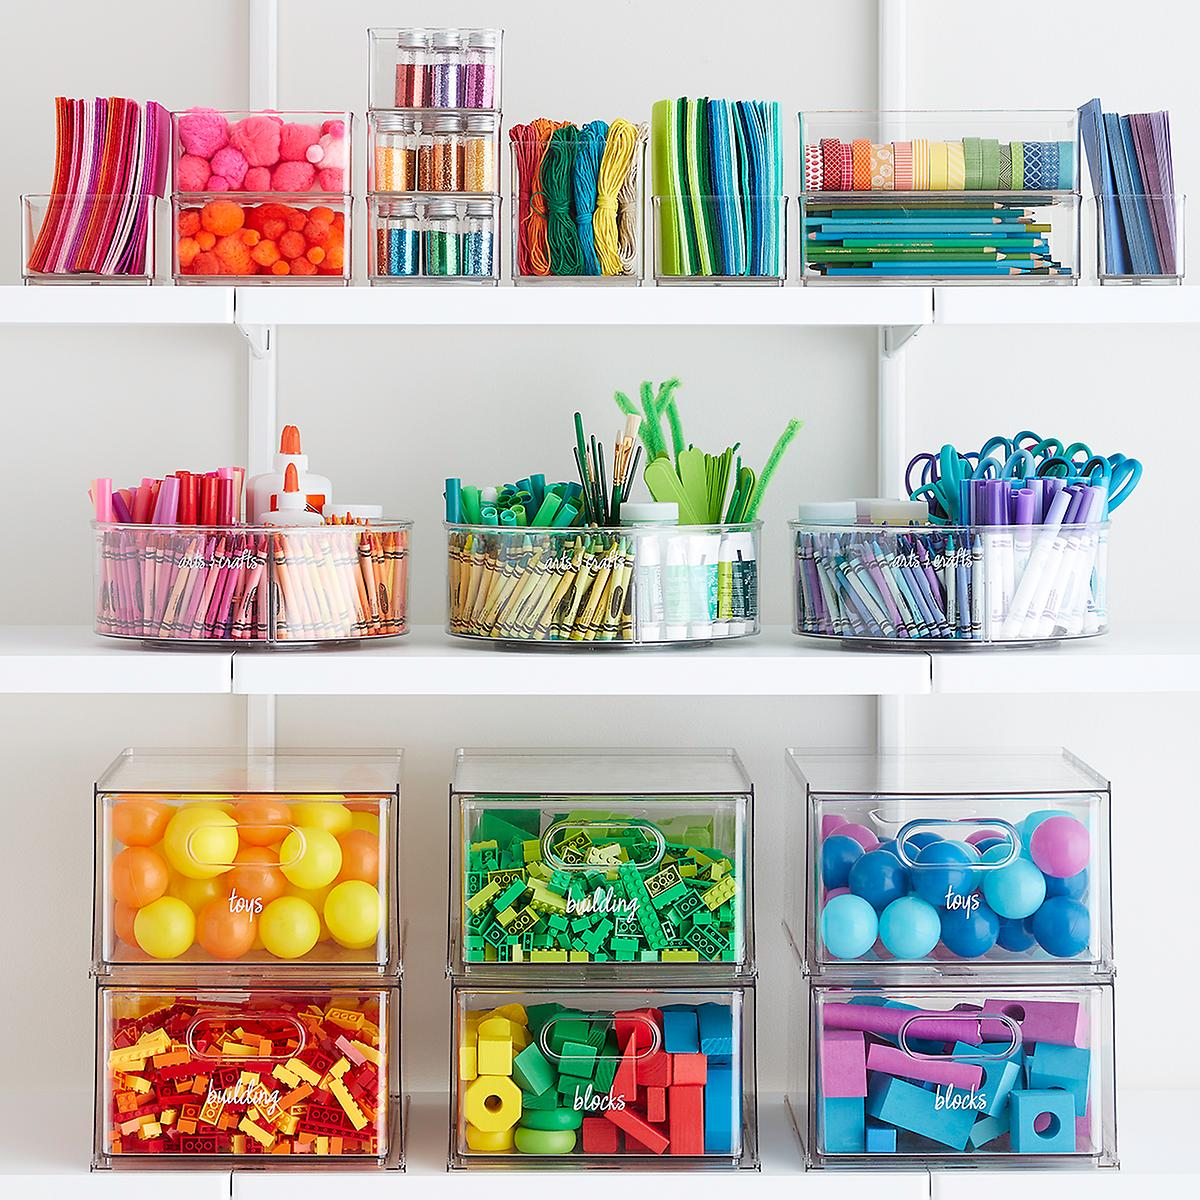 The Home Edit craft system- clear bins filled with crafts organized in ROYGBIV color order. Bins filled with crayons, cotton balls, construction paper and more.